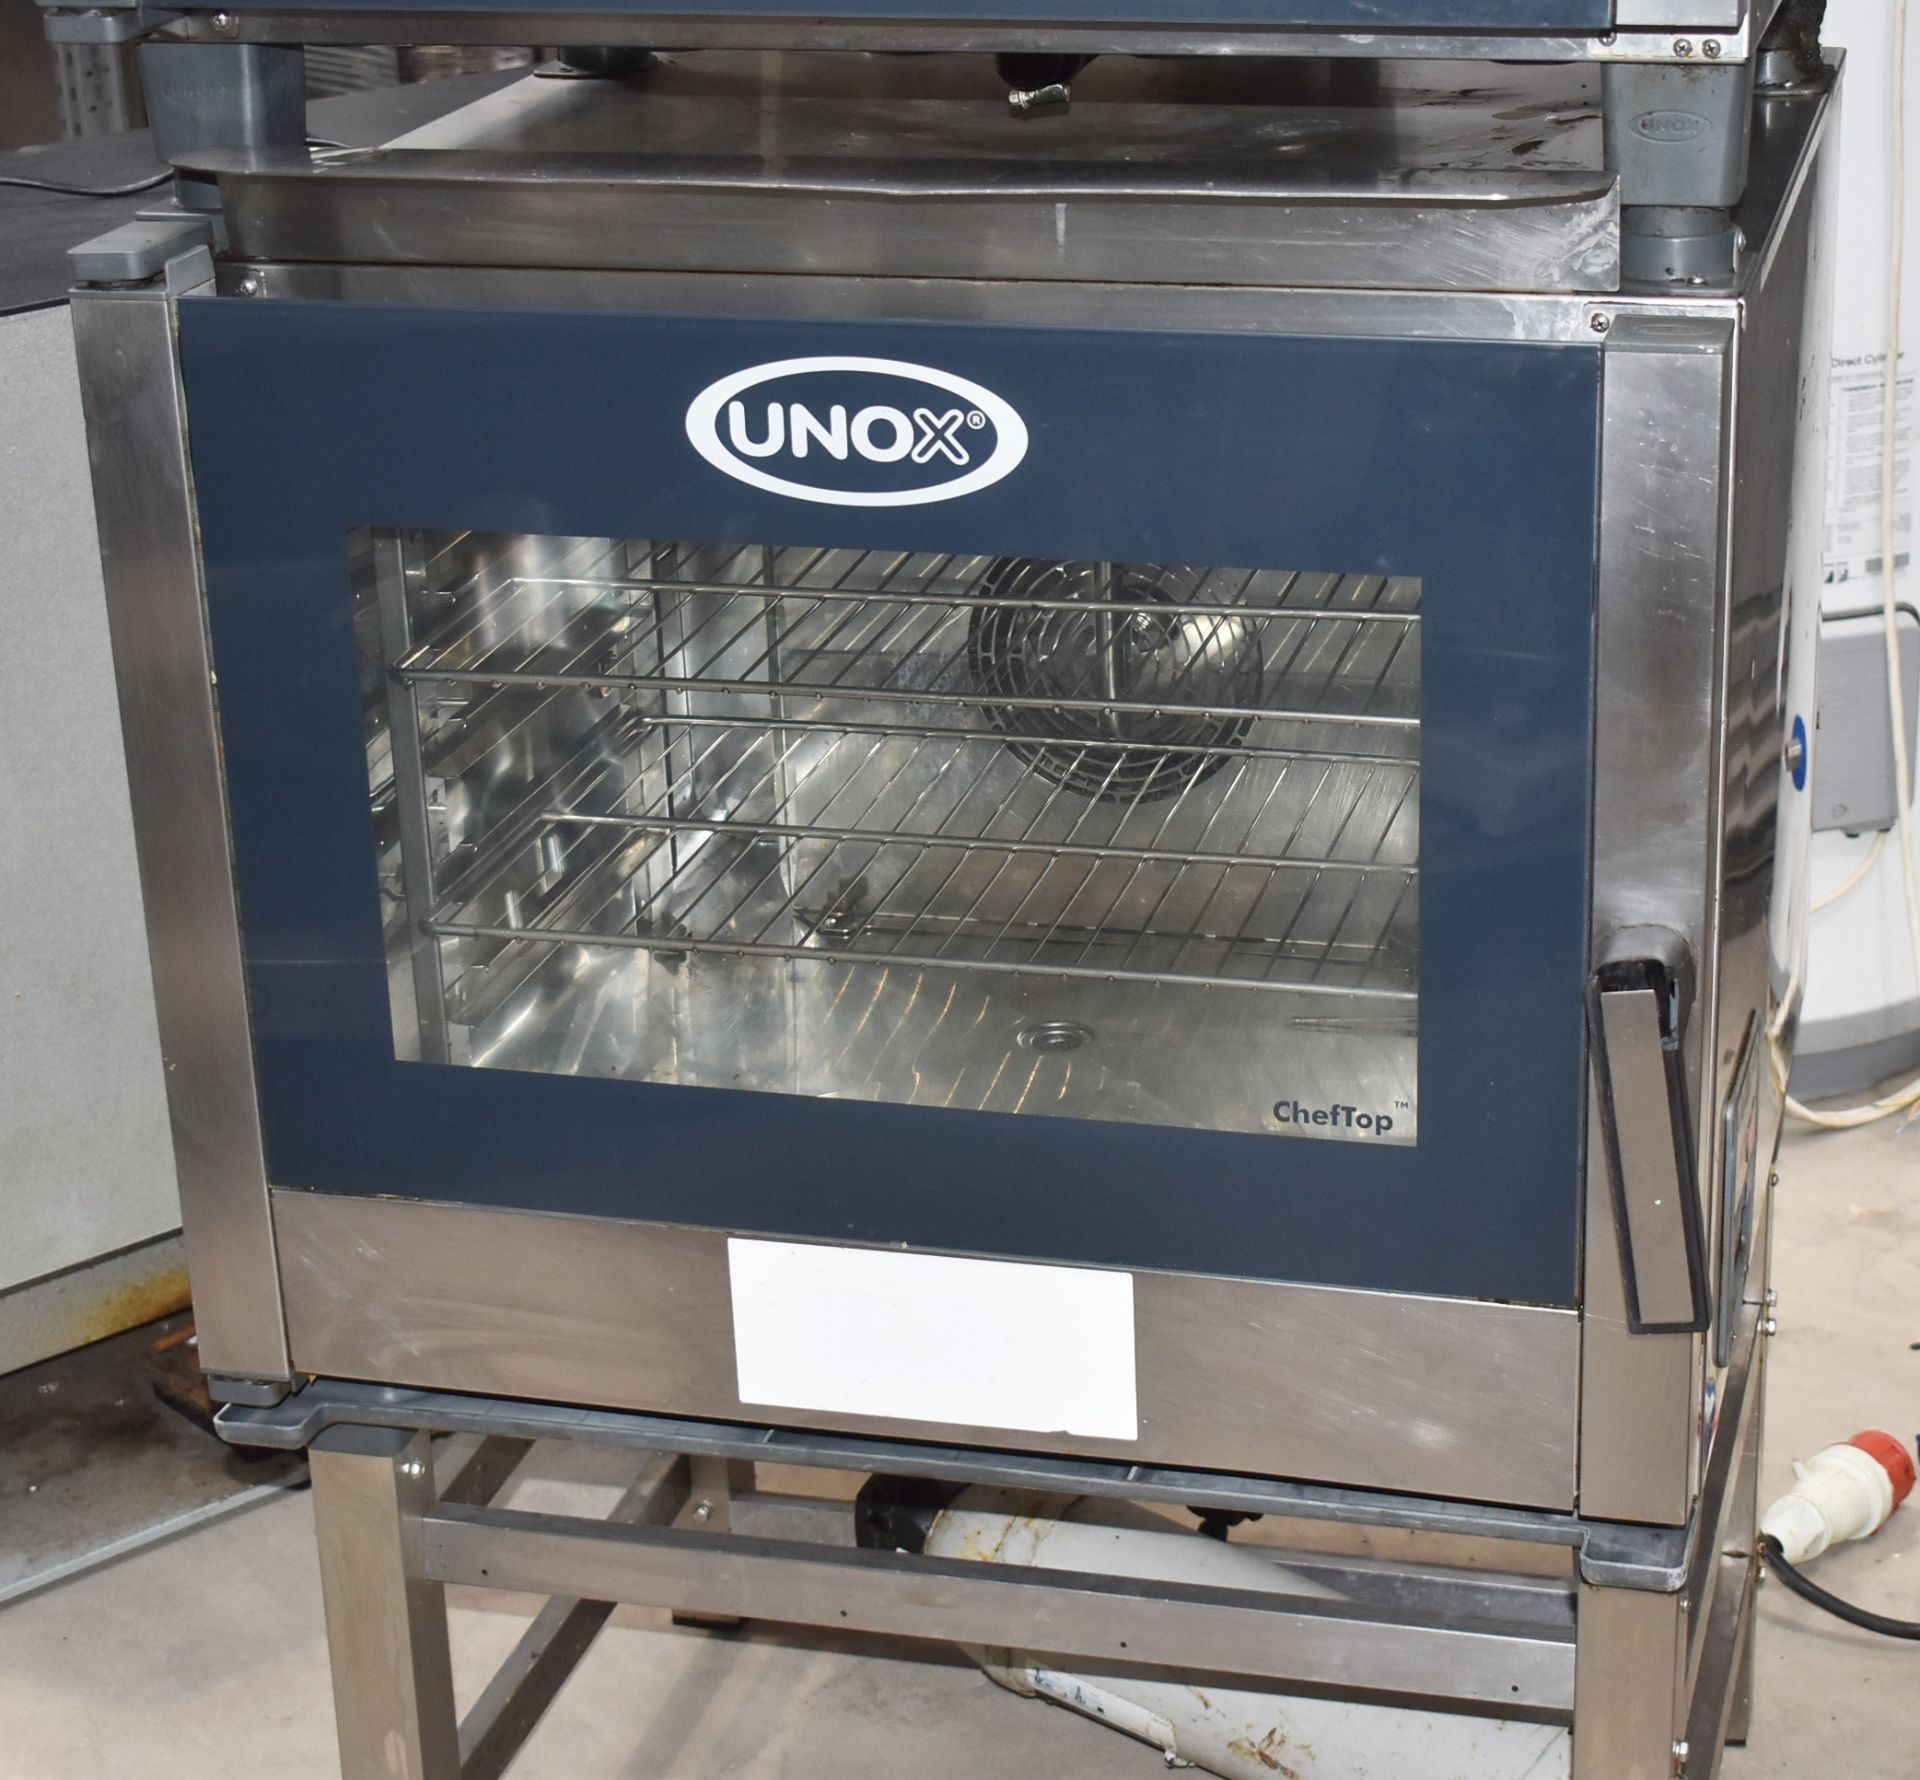 1 x Unox ChefTop XVL385 Commercial 3 Phase Double Oven For Slow Cooking Meats, Proving Dough & More - Image 12 of 26